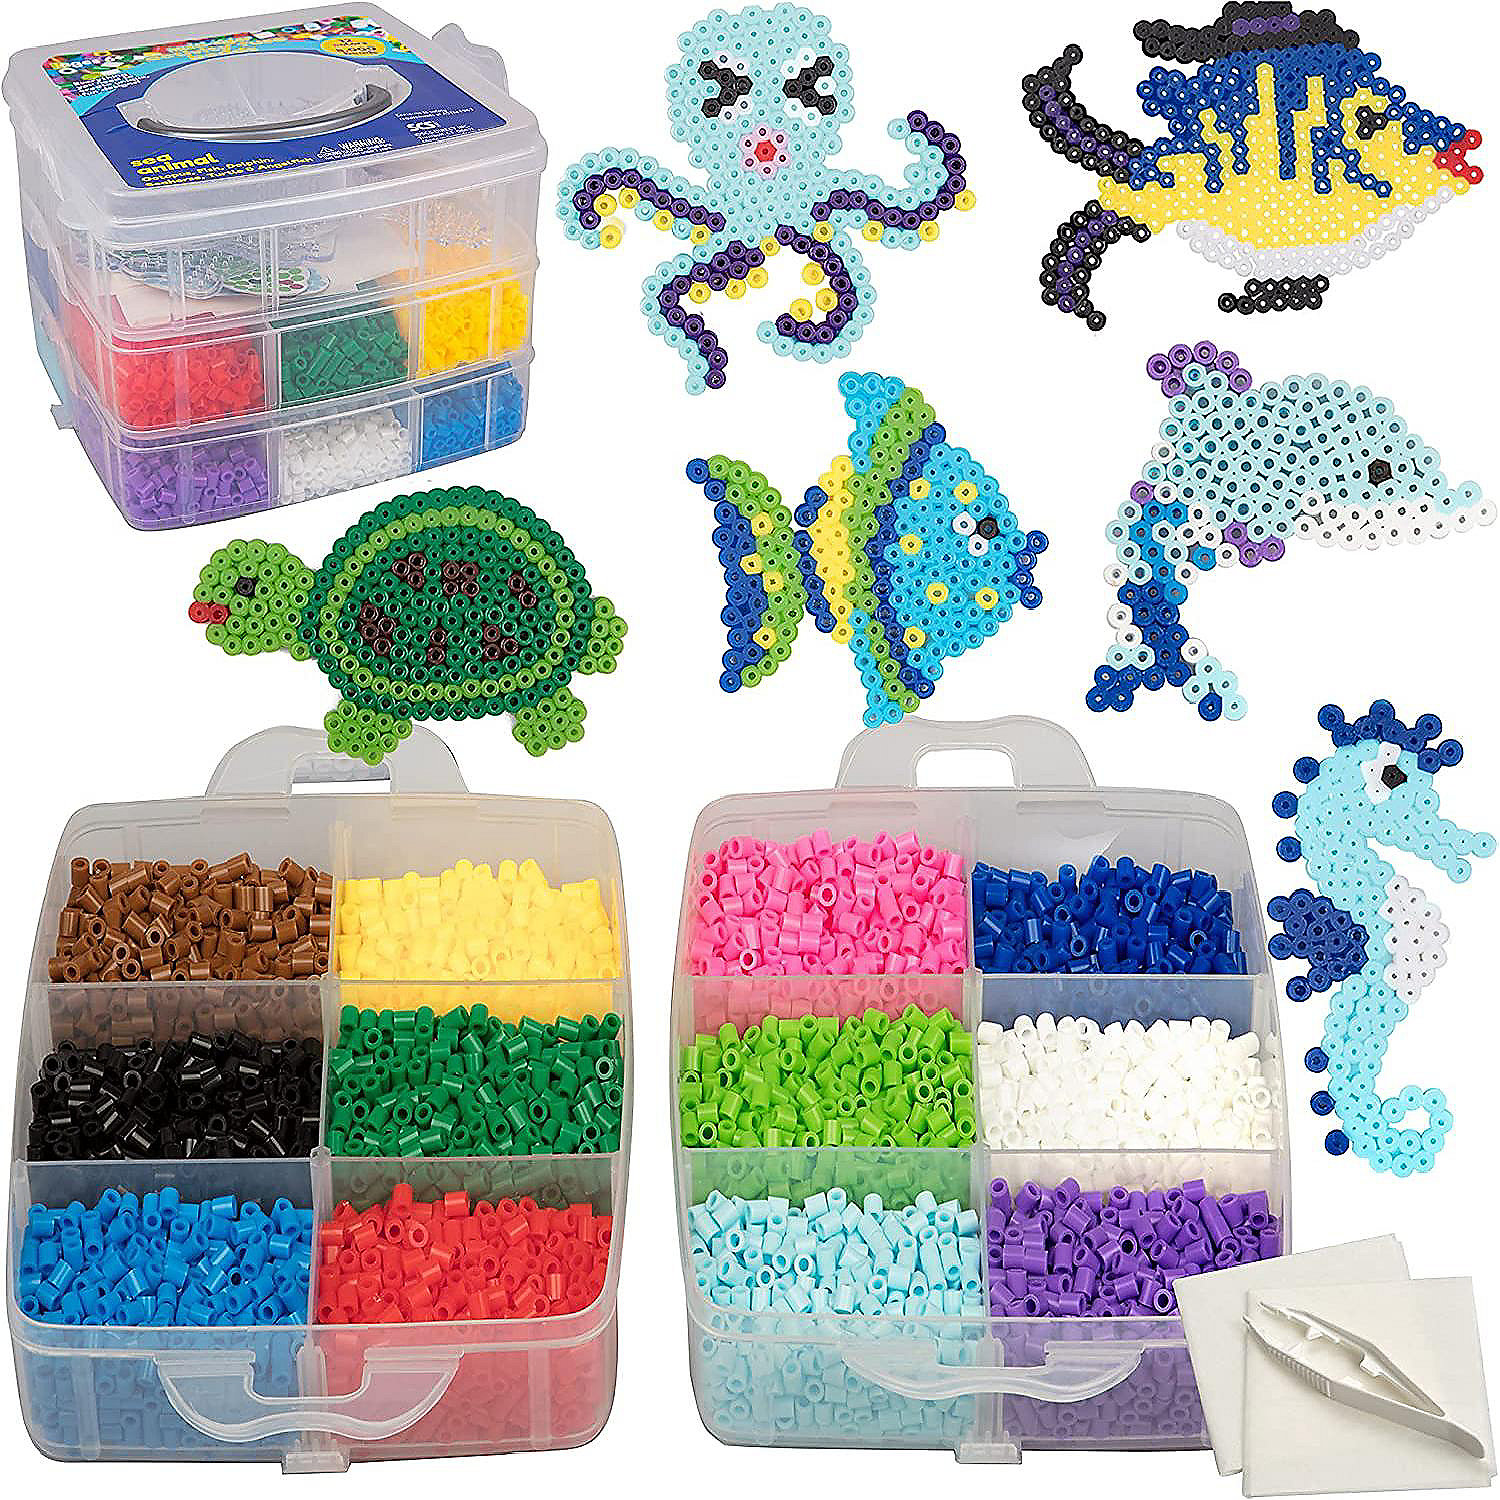 8,000pc Fuse Bead Super Kit Works with Perler Beads- Great Gift 12 Colors Case Tweezers Pixel Art Project Ironing Paper Peg Boards 